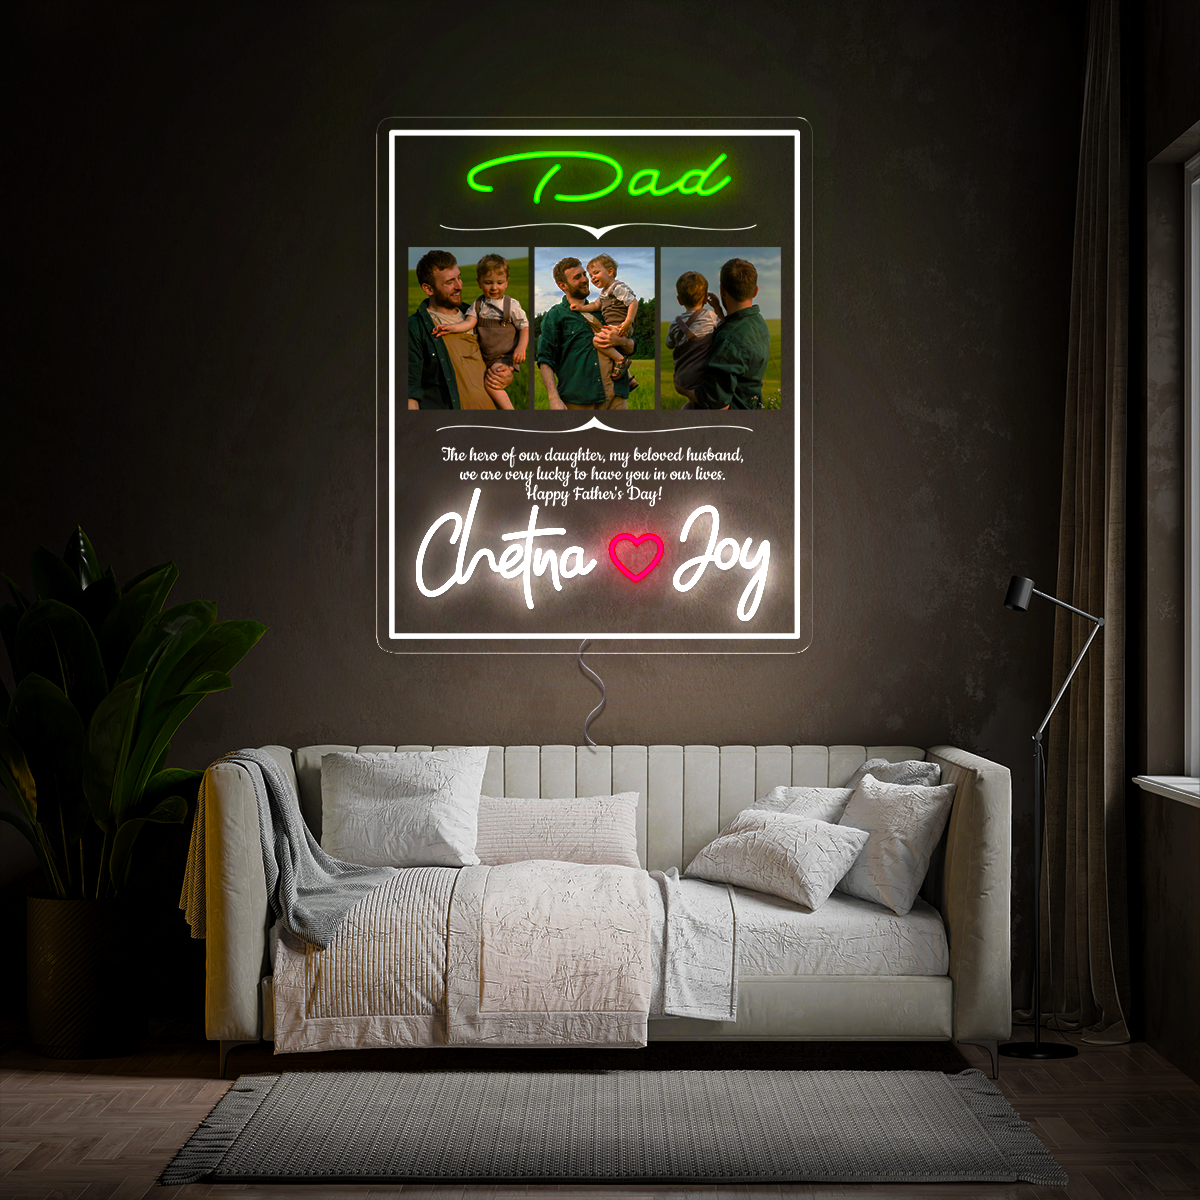 Personalized Dad Photo Collage Artwork Neon Sign